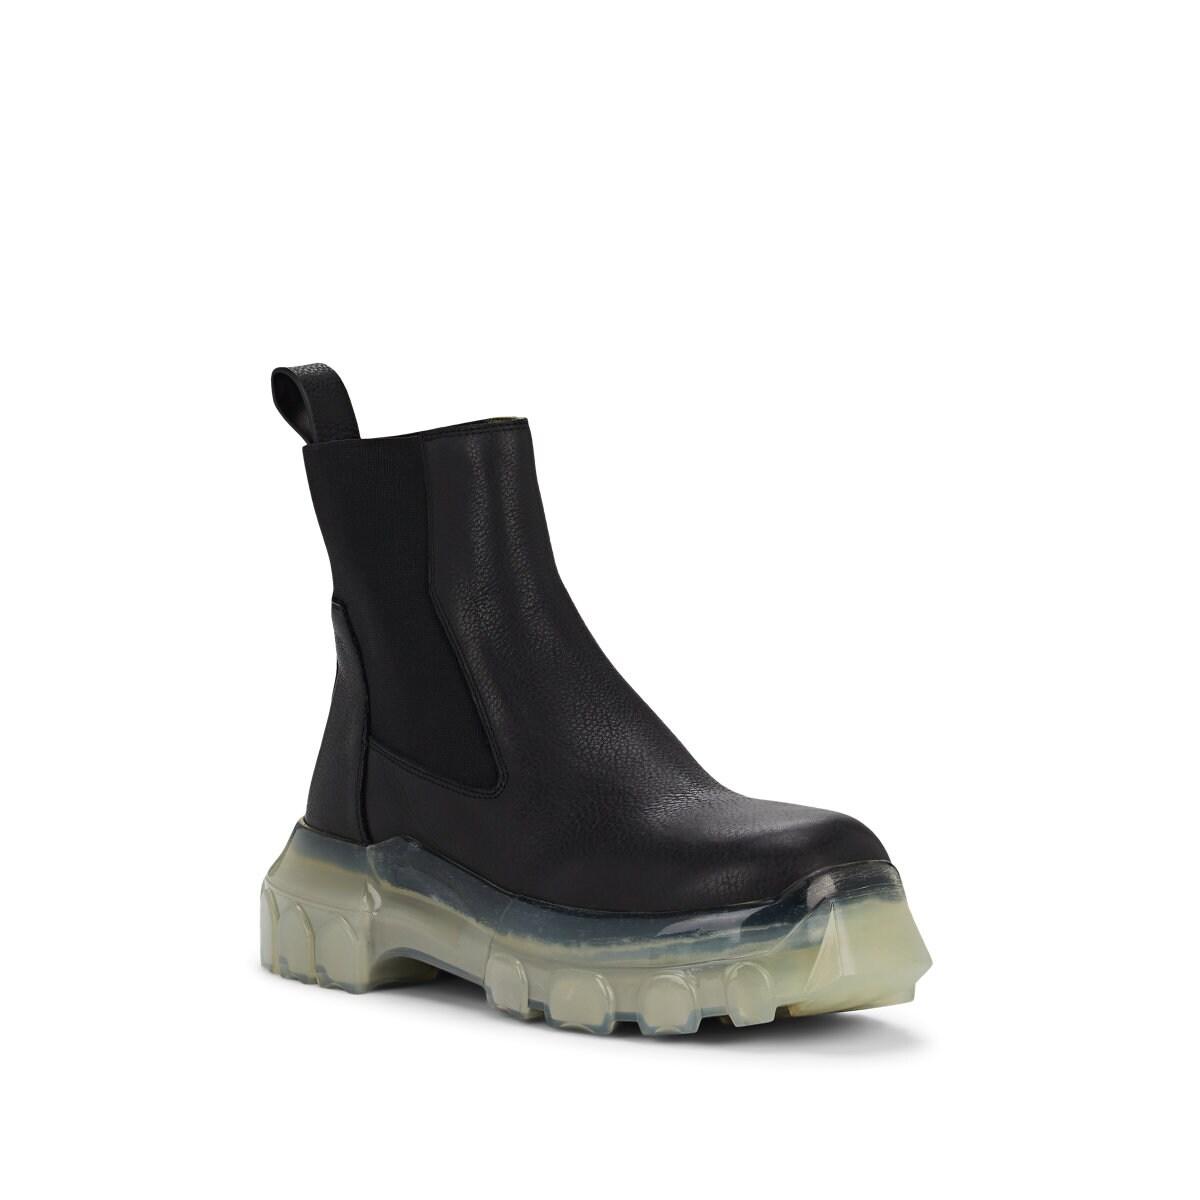 Rick Owens Tractor Leather Chelsea Boots in Black - Lyst